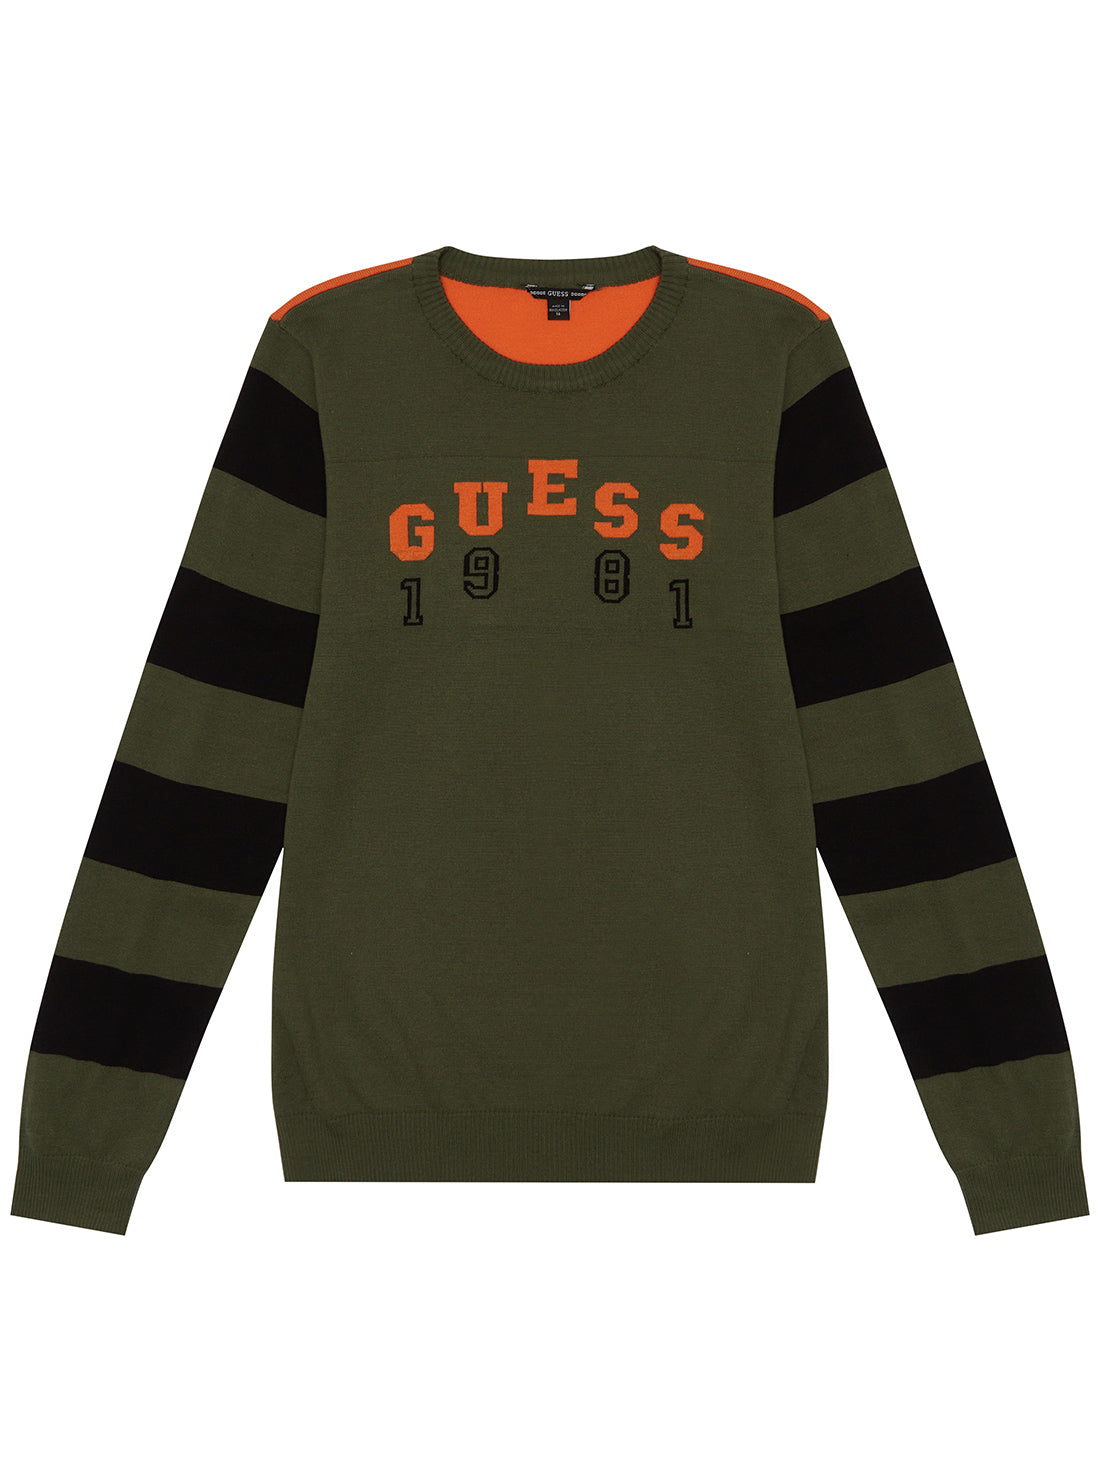 GUESS Green Long Sleeve Jumper (7-16) front view